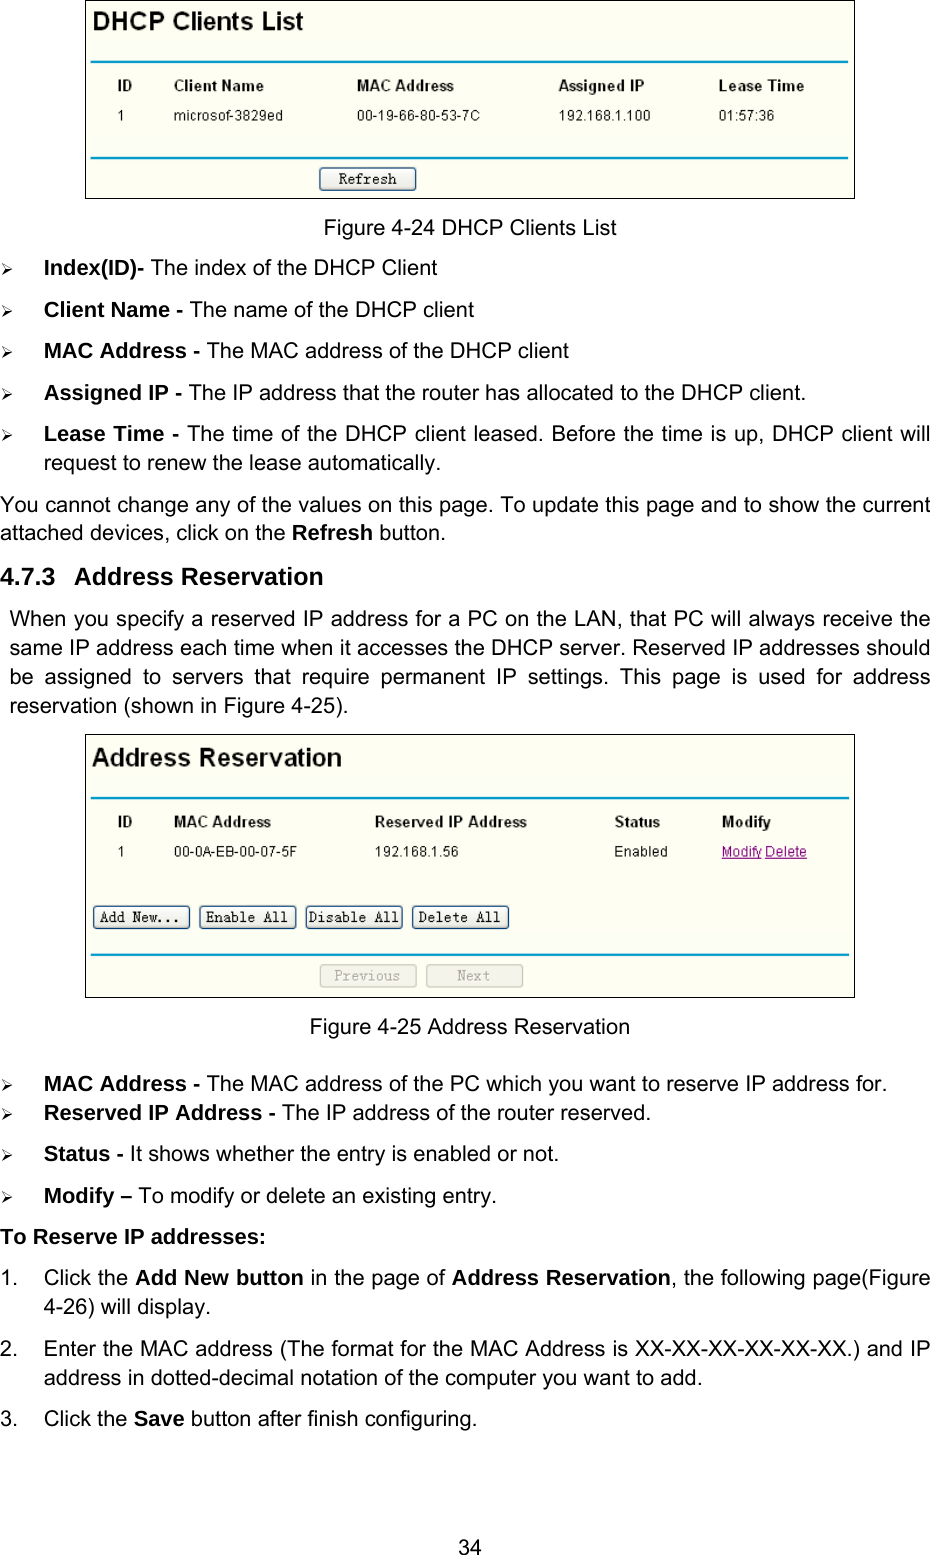  34  Figure 4-24 DHCP Clients List ¾ Index(ID)- The index of the DHCP Client   ¾ Client Name - The name of the DHCP client   ¾ MAC Address - The MAC address of the DHCP client   ¾ Assigned IP - The IP address that the router has allocated to the DHCP client. ¾ Lease Time - The time of the DHCP client leased. Before the time is up, DHCP client will request to renew the lease automatically. You cannot change any of the values on this page. To update this page and to show the current attached devices, click on the Refresh button. 4.7.3  Address Reservation When you specify a reserved IP address for a PC on the LAN, that PC will always receive the same IP address each time when it accesses the DHCP server. Reserved IP addresses should be assigned to servers that require permanent IP settings. This page is used for address reservation (shown in Figure 4-25).  Figure 4-25 Address Reservation ¾ MAC Address - The MAC address of the PC which you want to reserve IP address for. ¾ Reserved IP Address - The IP address of the router reserved. ¾ Status - It shows whether the entry is enabled or not. ¾ Modify – To modify or delete an existing entry. To Reserve IP addresses:   1. Click the Add New button in the page of Address Reservation, the following page(Figure 4-26) will display.   2.  Enter the MAC address (The format for the MAC Address is XX-XX-XX-XX-XX-XX.) and IP address in dotted-decimal notation of the computer you want to add.   3. Click the Save button after finish configuring.   